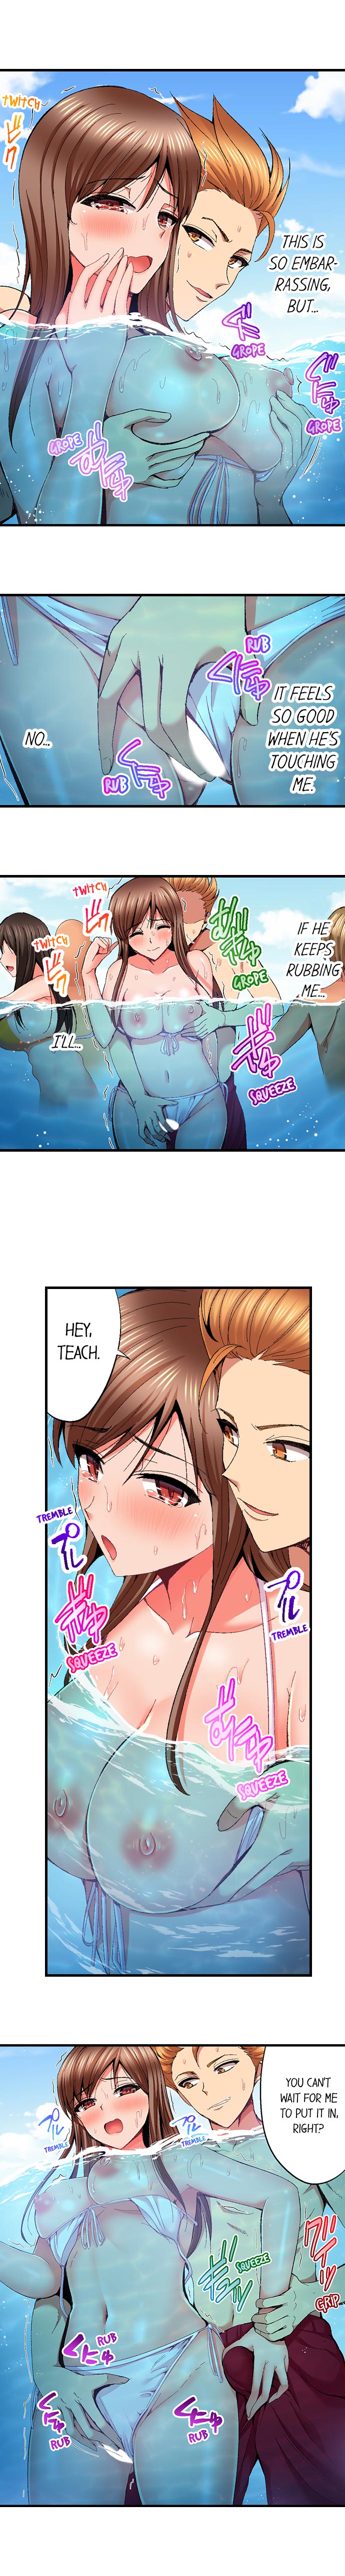 Netorare My Teacher With My Friends - Chapter 13 Page 8